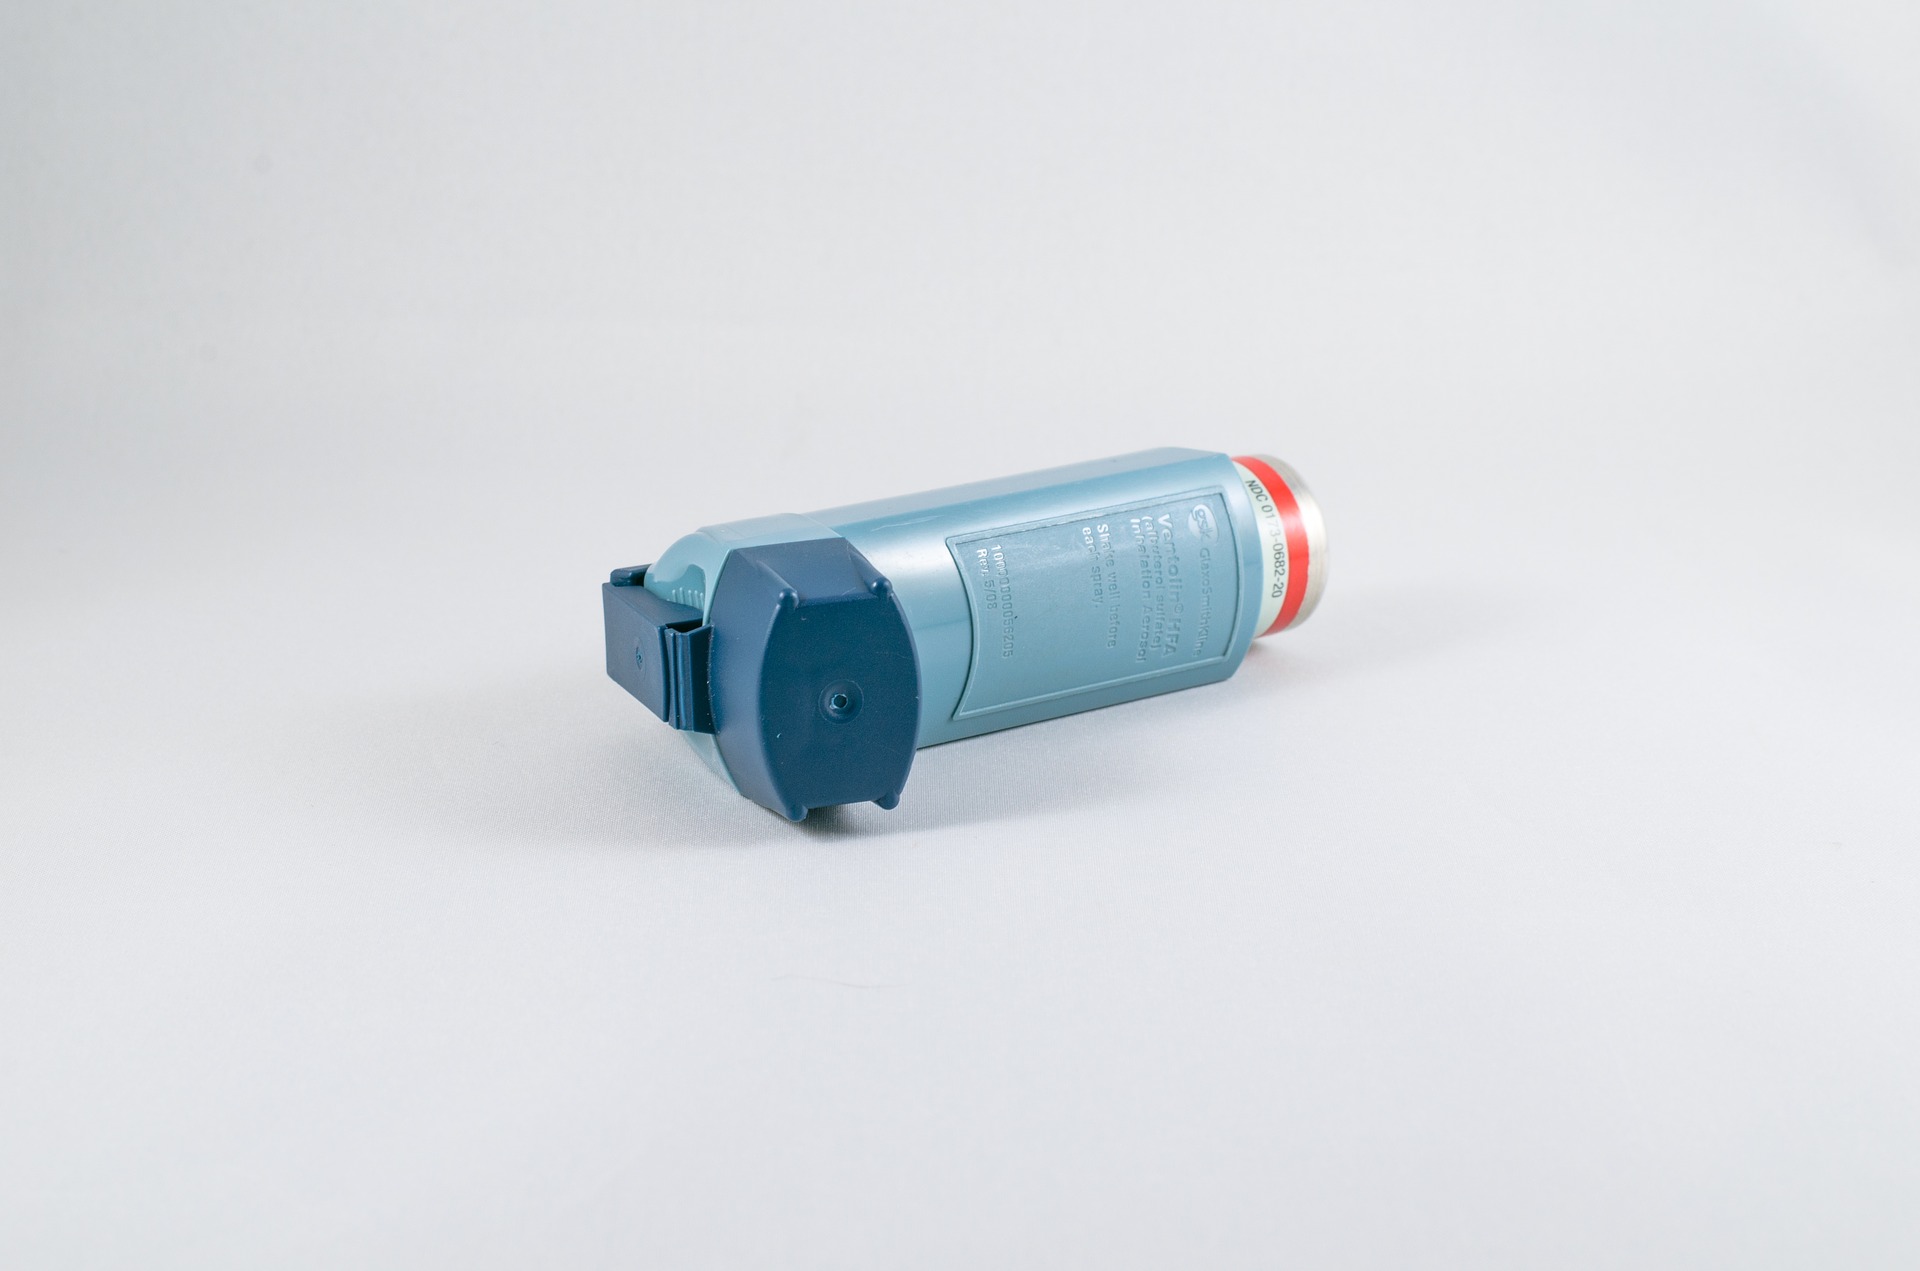 an inhaler on white table, one of the most common asthma medications